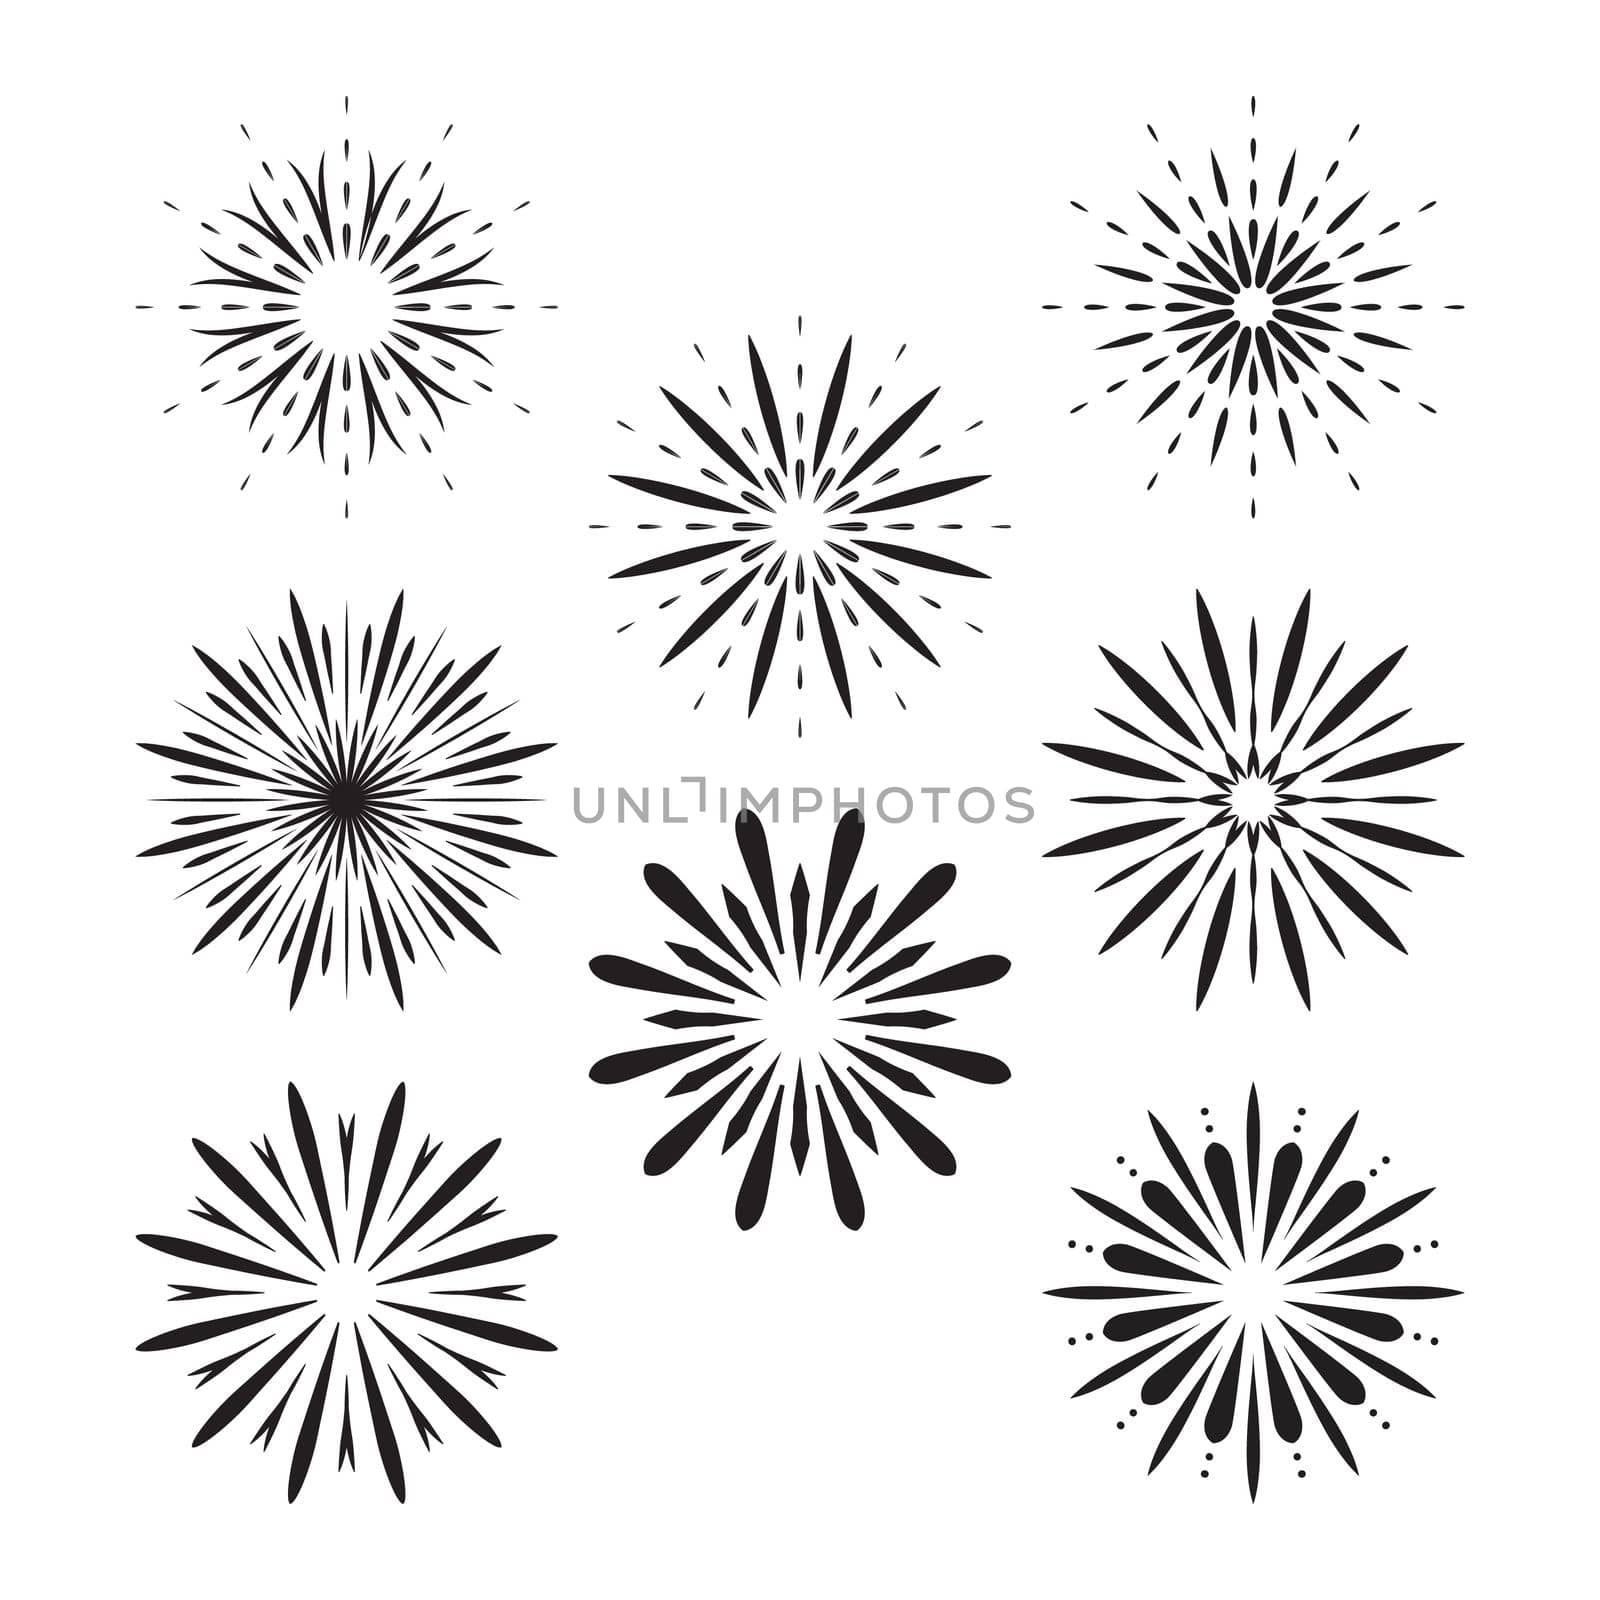 Fireworks icons collection. Graphic different black symbol for festival or carnival explosion, firecracker. Burst contour pattern shaped set isolated on white. Jpeg by Fyuriy